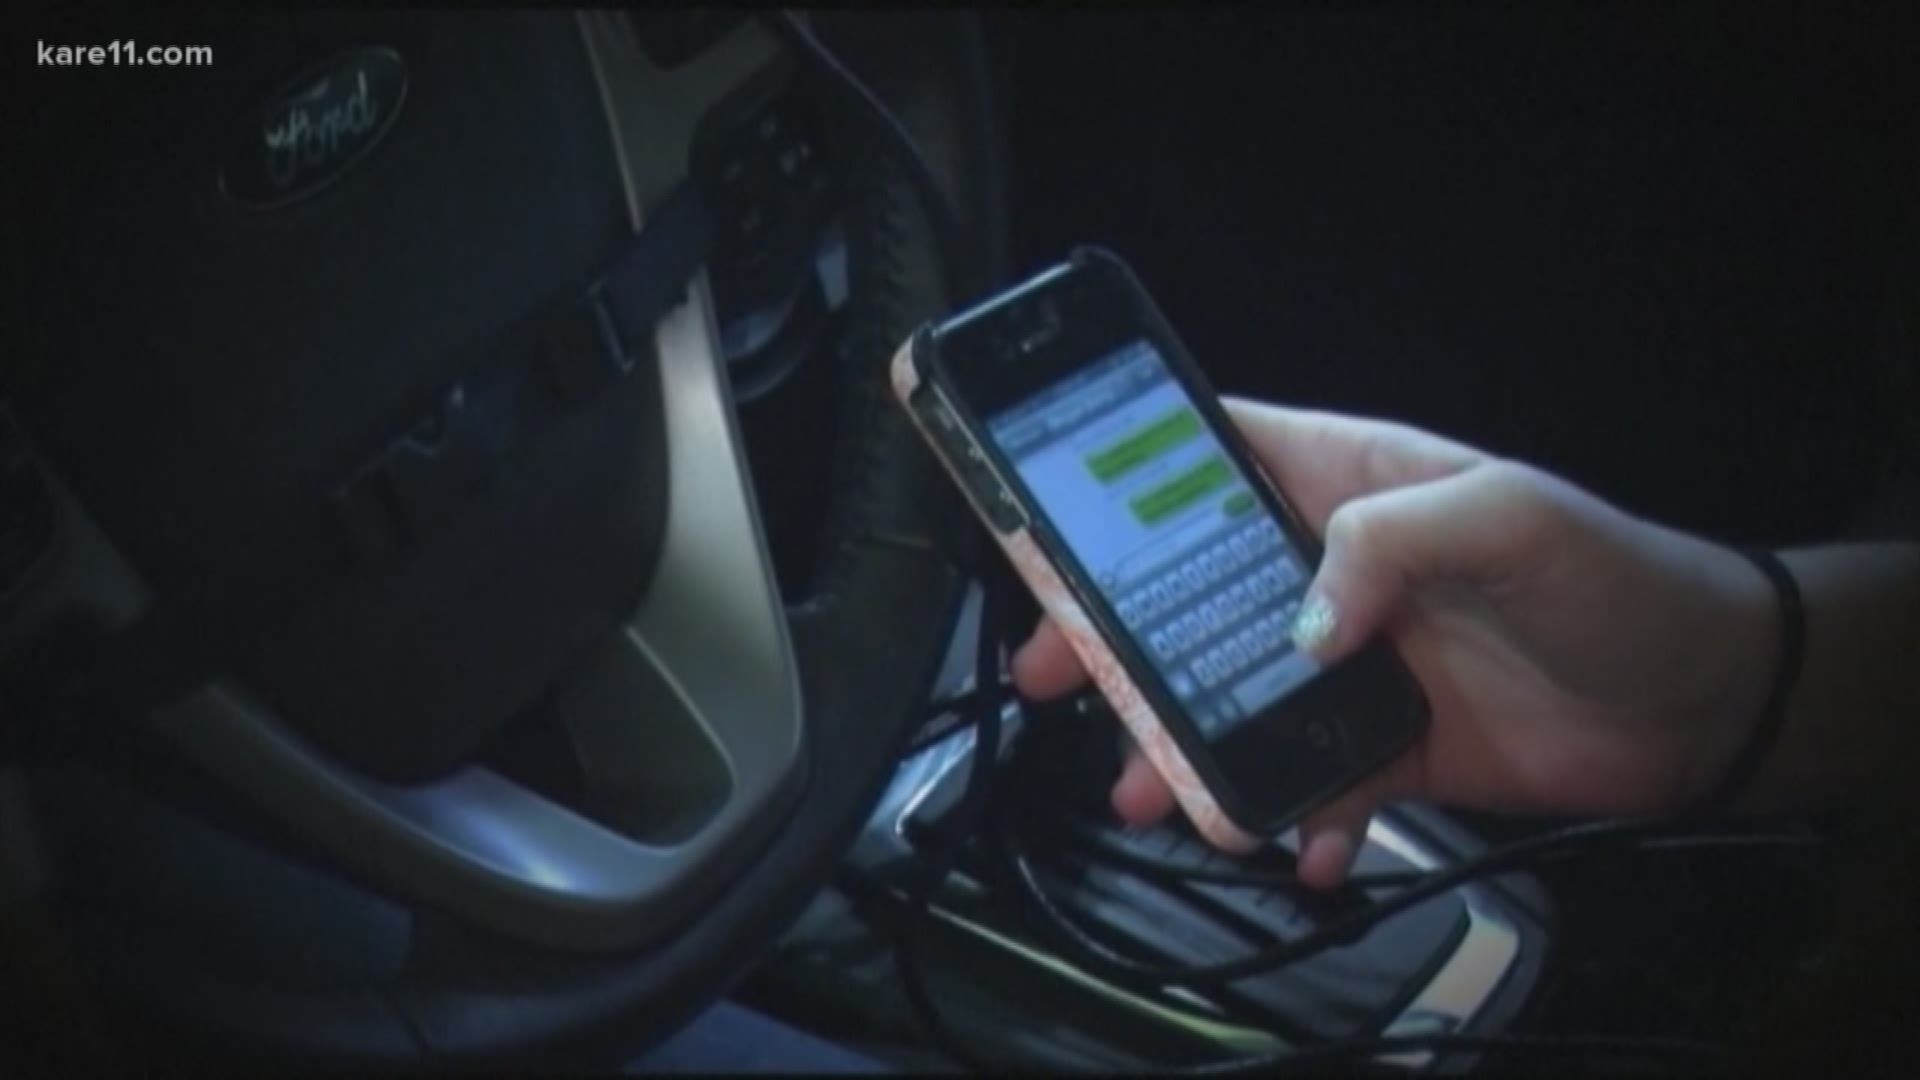 Honing in on the a bill that would get tough on those who text while driving, even under current law and just how big the penalties could be.
As John Croman reports -- it could be far more than just getting a ticket.